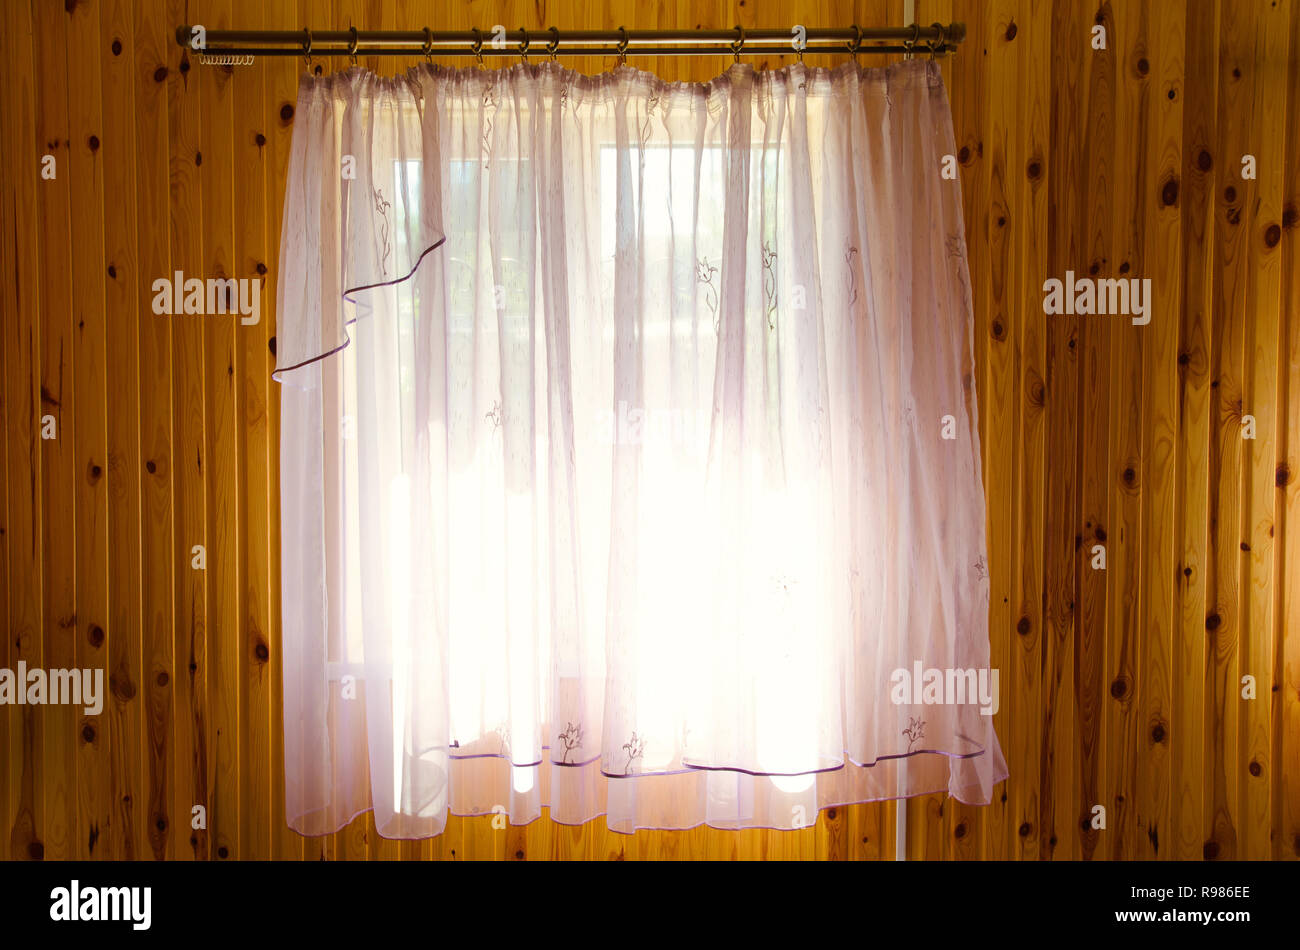 window curtain in a wooden wall Stock Photo